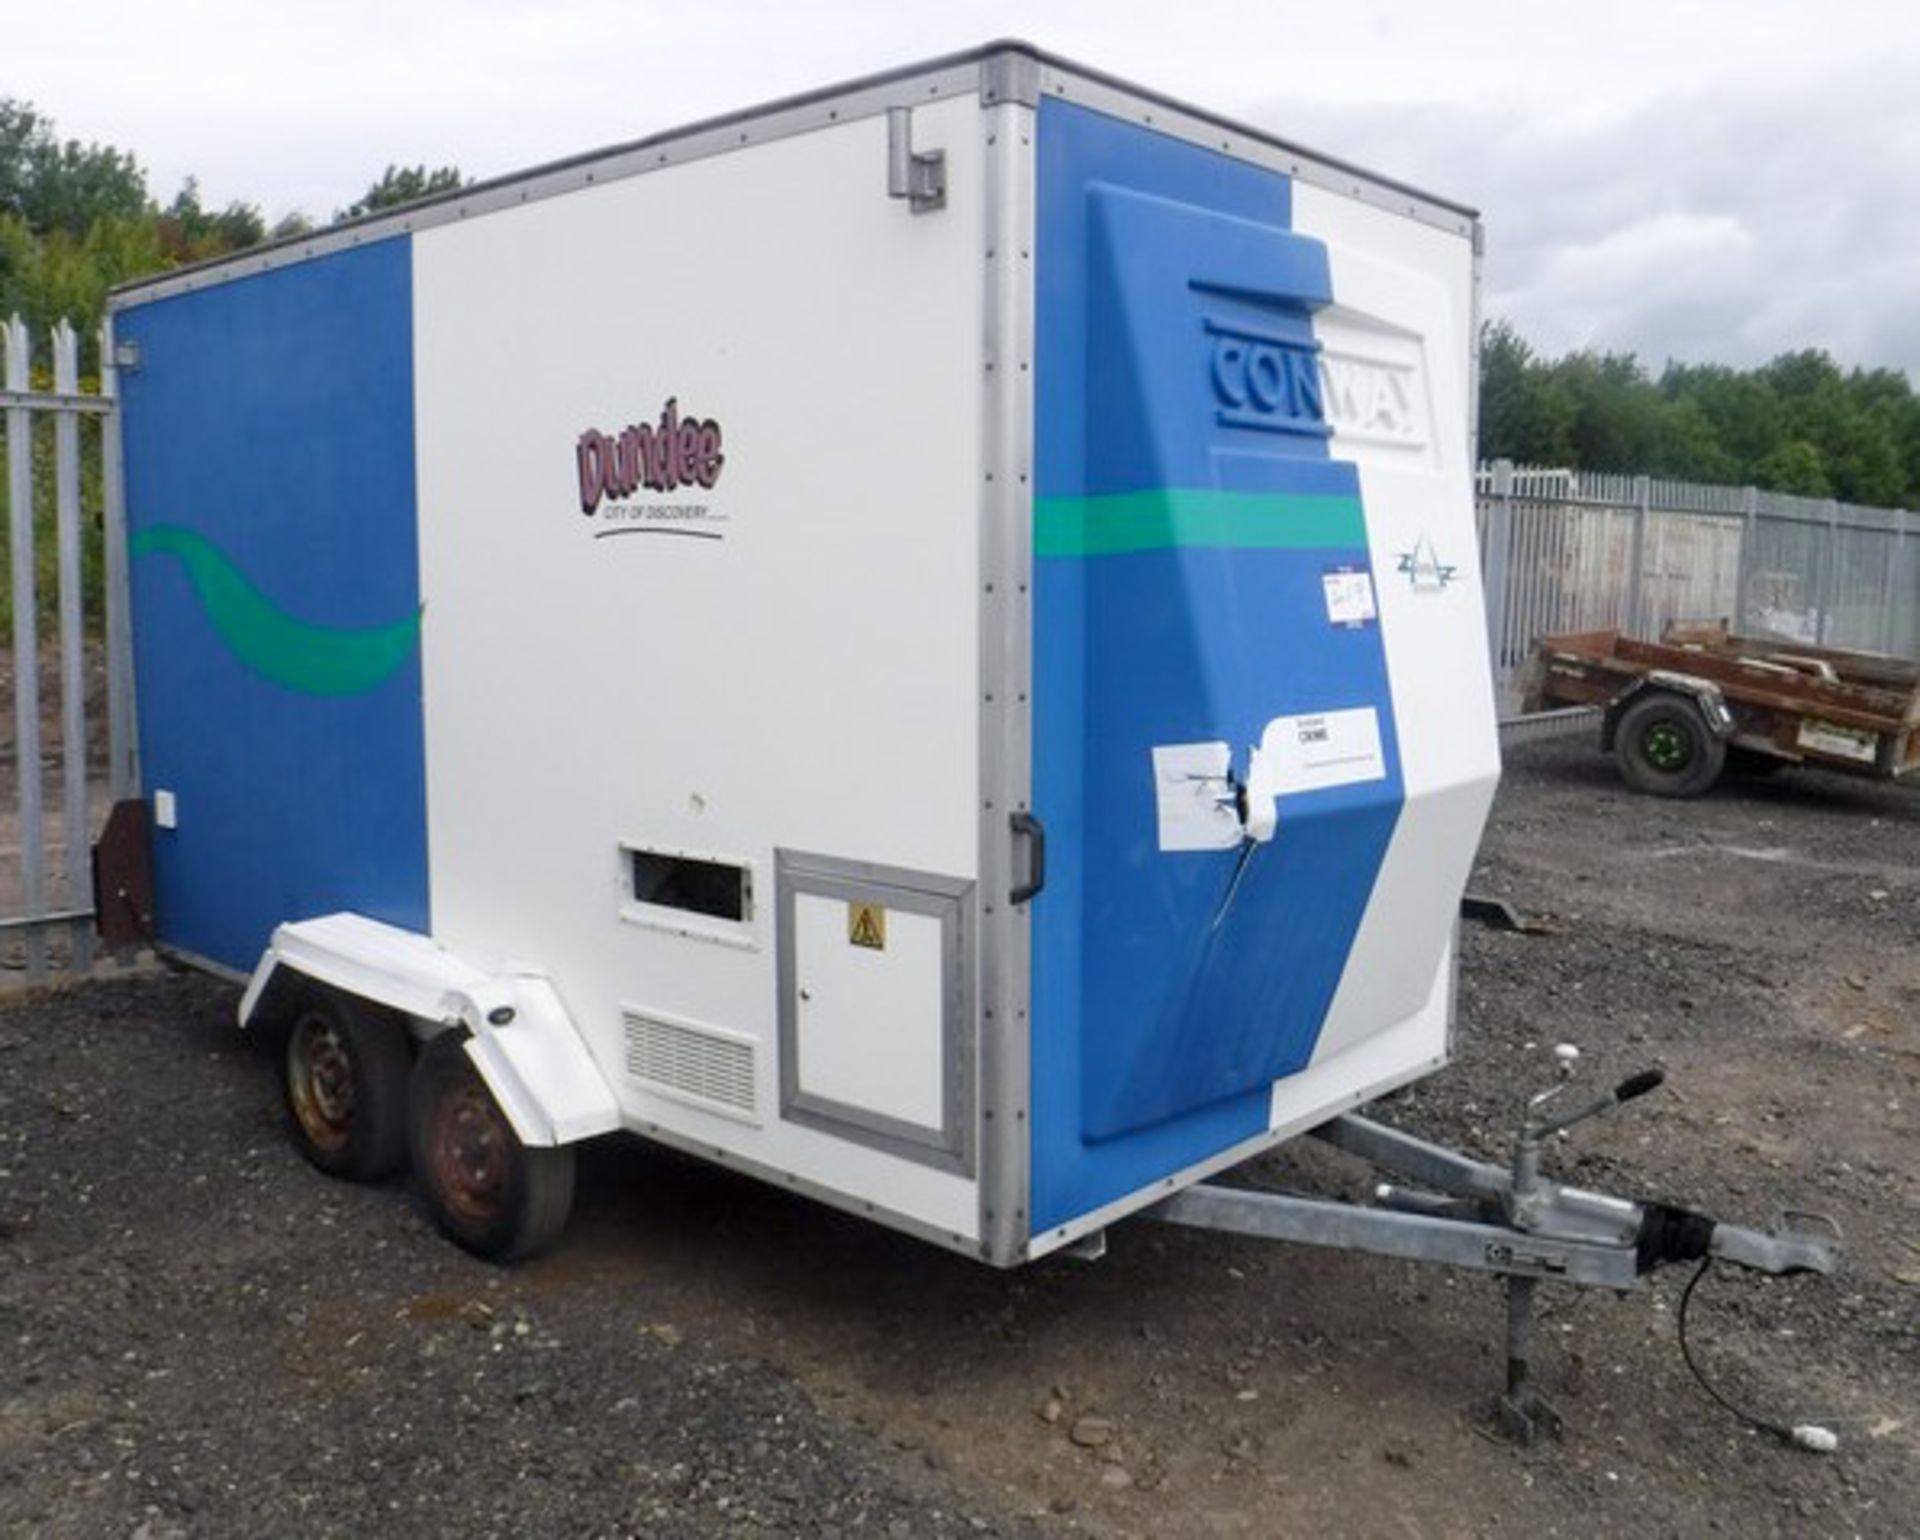 CONWAY 12ft events trailer. Twin axle. Model - ET 2600. S/N ZA13468